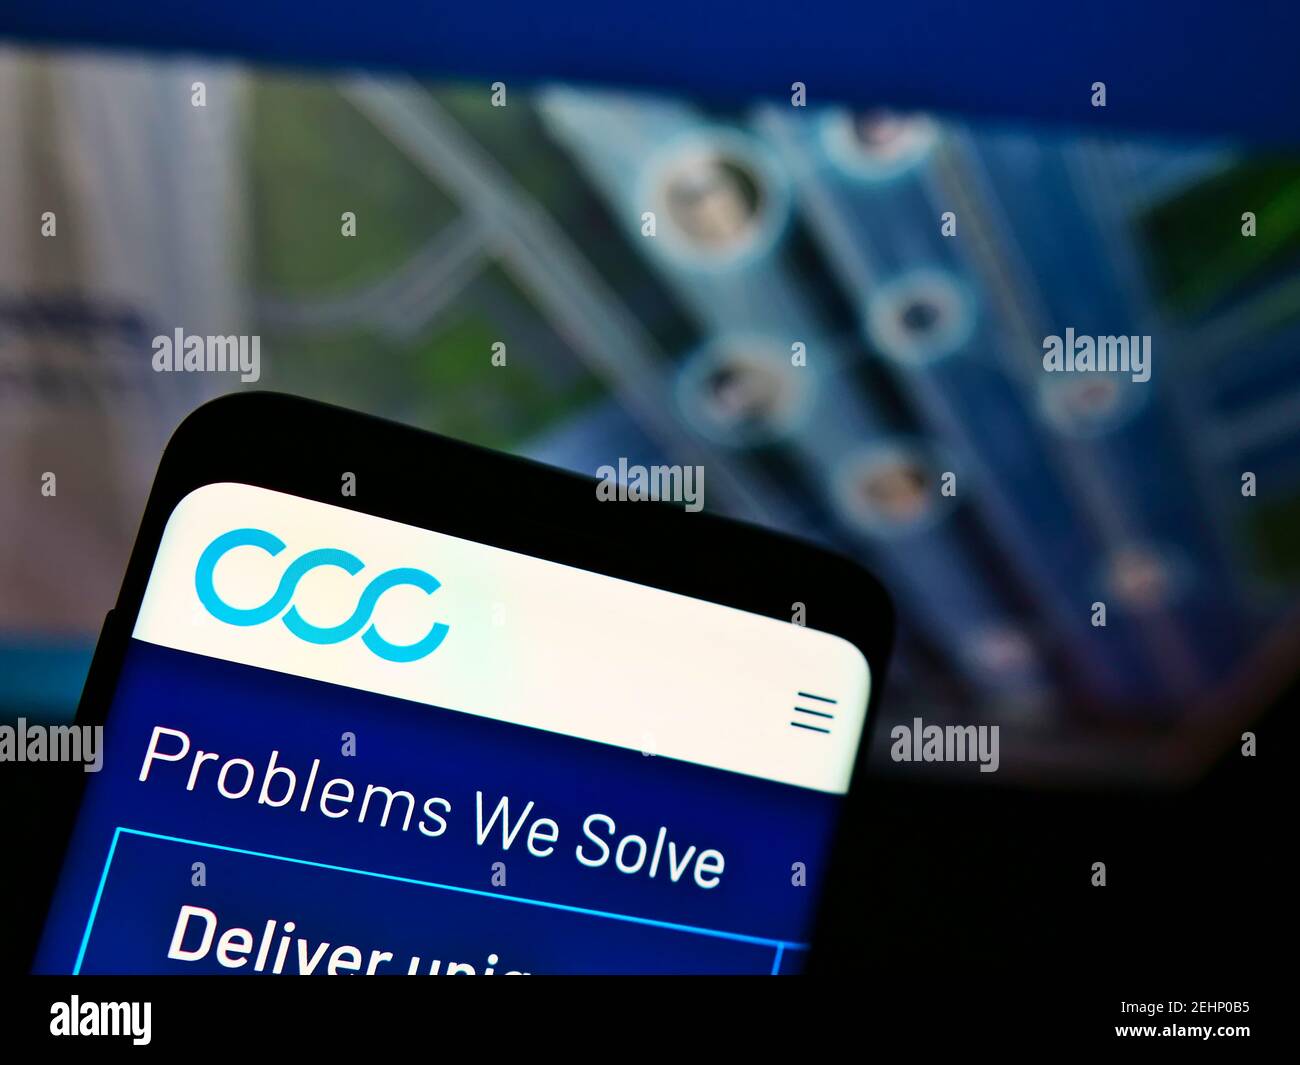 Smartphone with business website and logo of American software company CCC Information Services Inc. on screen. Focus on top-left of phone display. Stock Photo